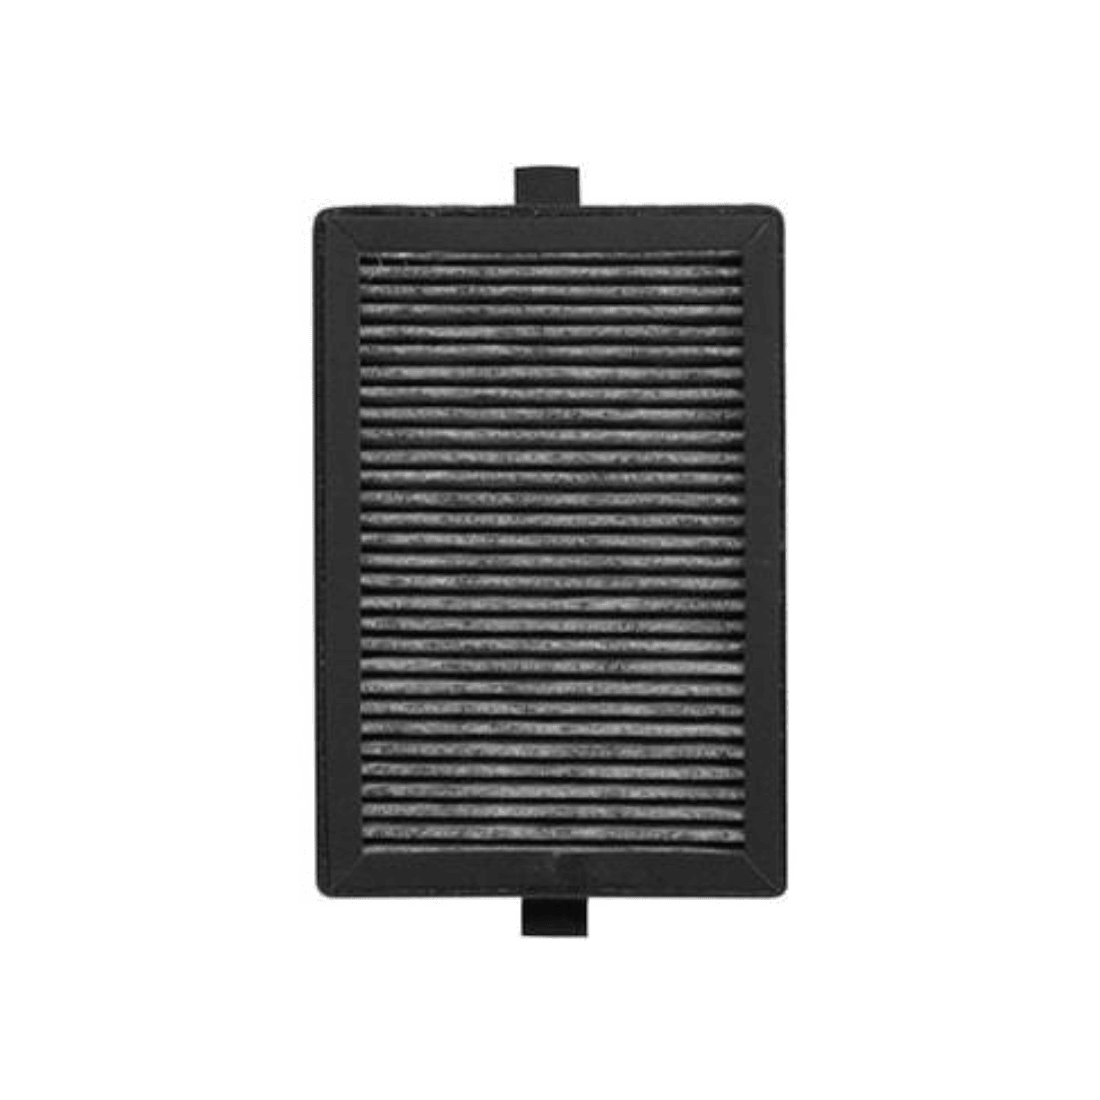 Replacement Filter for Motopure Ultra Car Air Purifier - Atlanta Healthcare